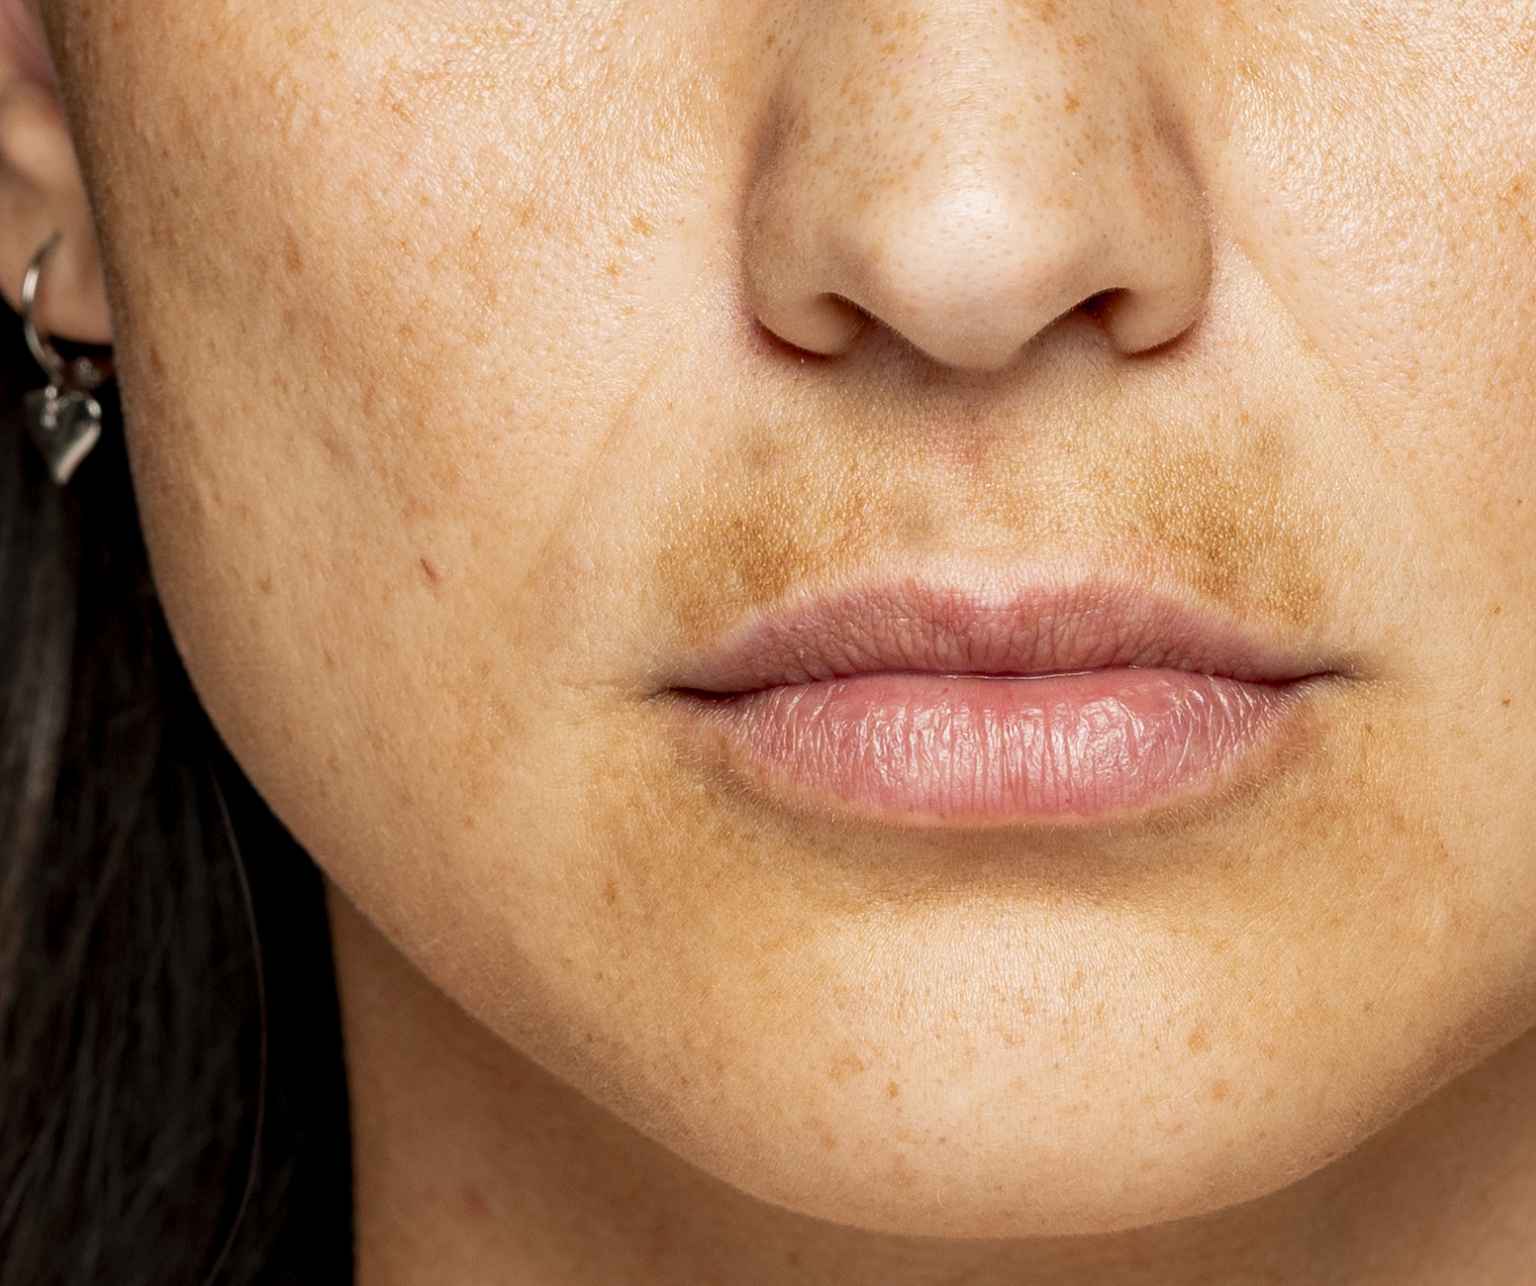 So many people are embarrassed by pigment above their lip, humorously called Melasma Mustache or Sun Mustache. A darkened upper lip is not painful but can make you self-conscious and emotionally upset.